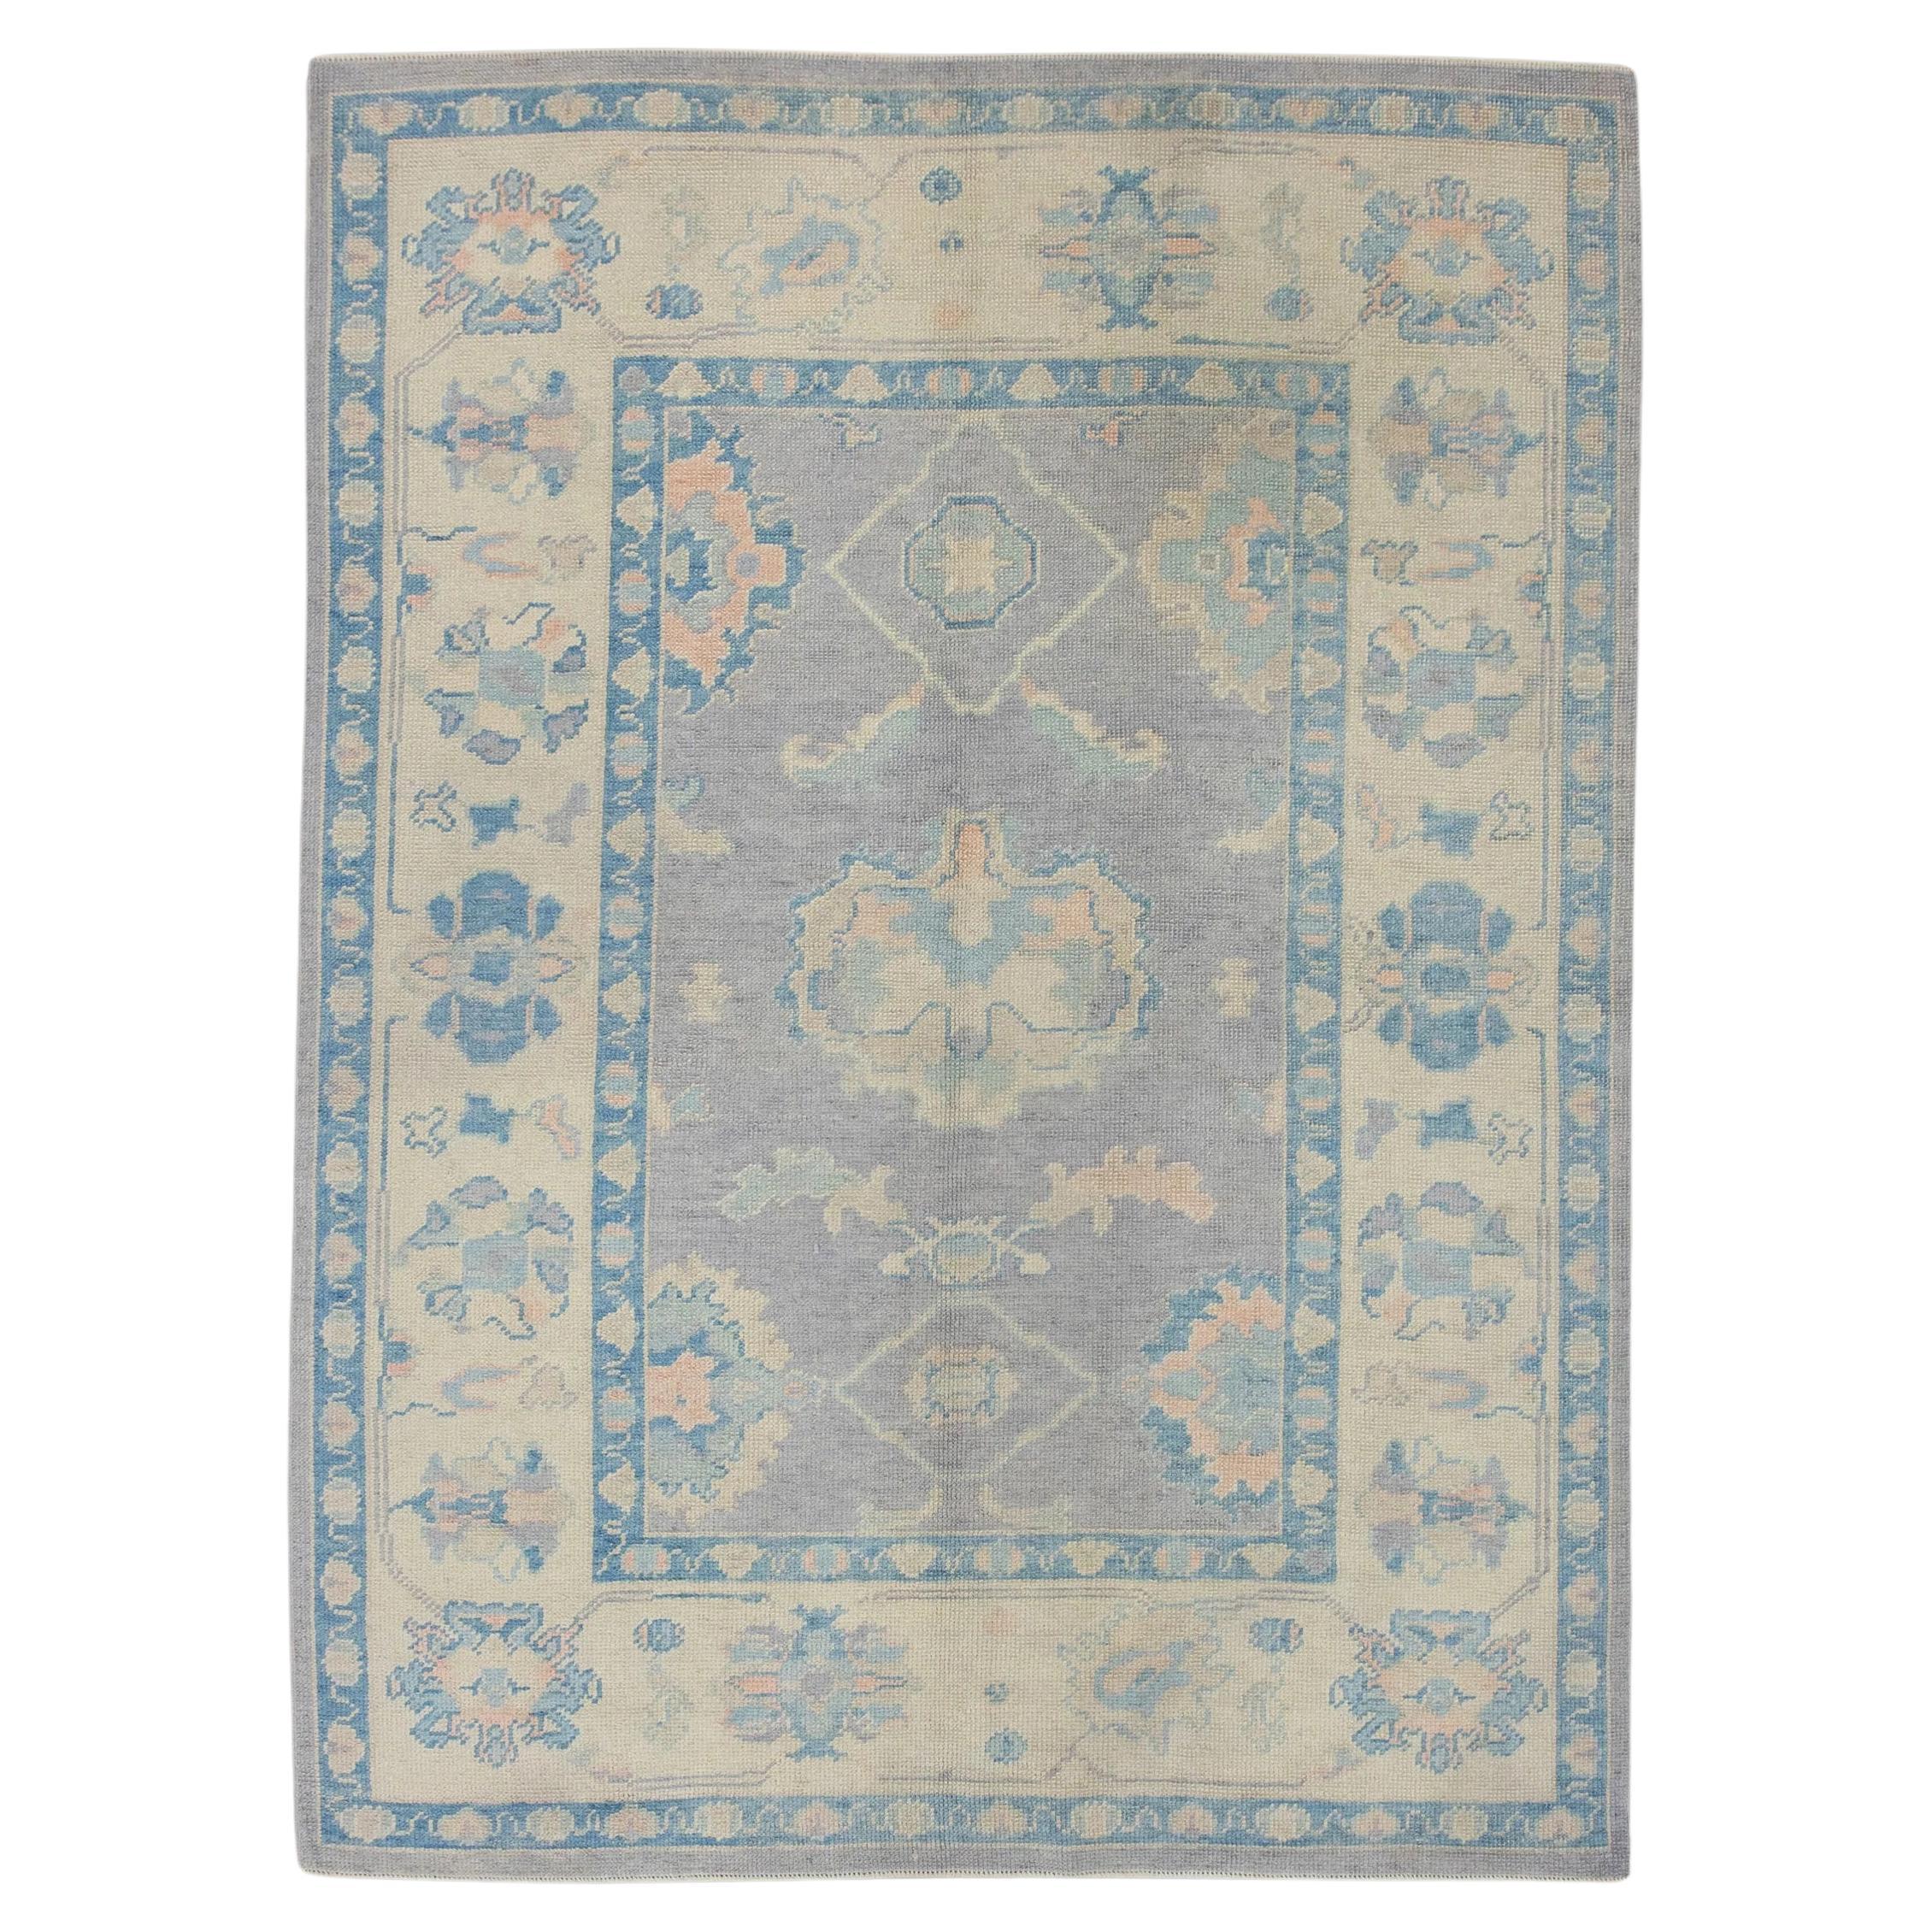 Purple and Blue Floral Handwoven Wool Turkish Oushak Rug 5'3" x 6'11" For Sale